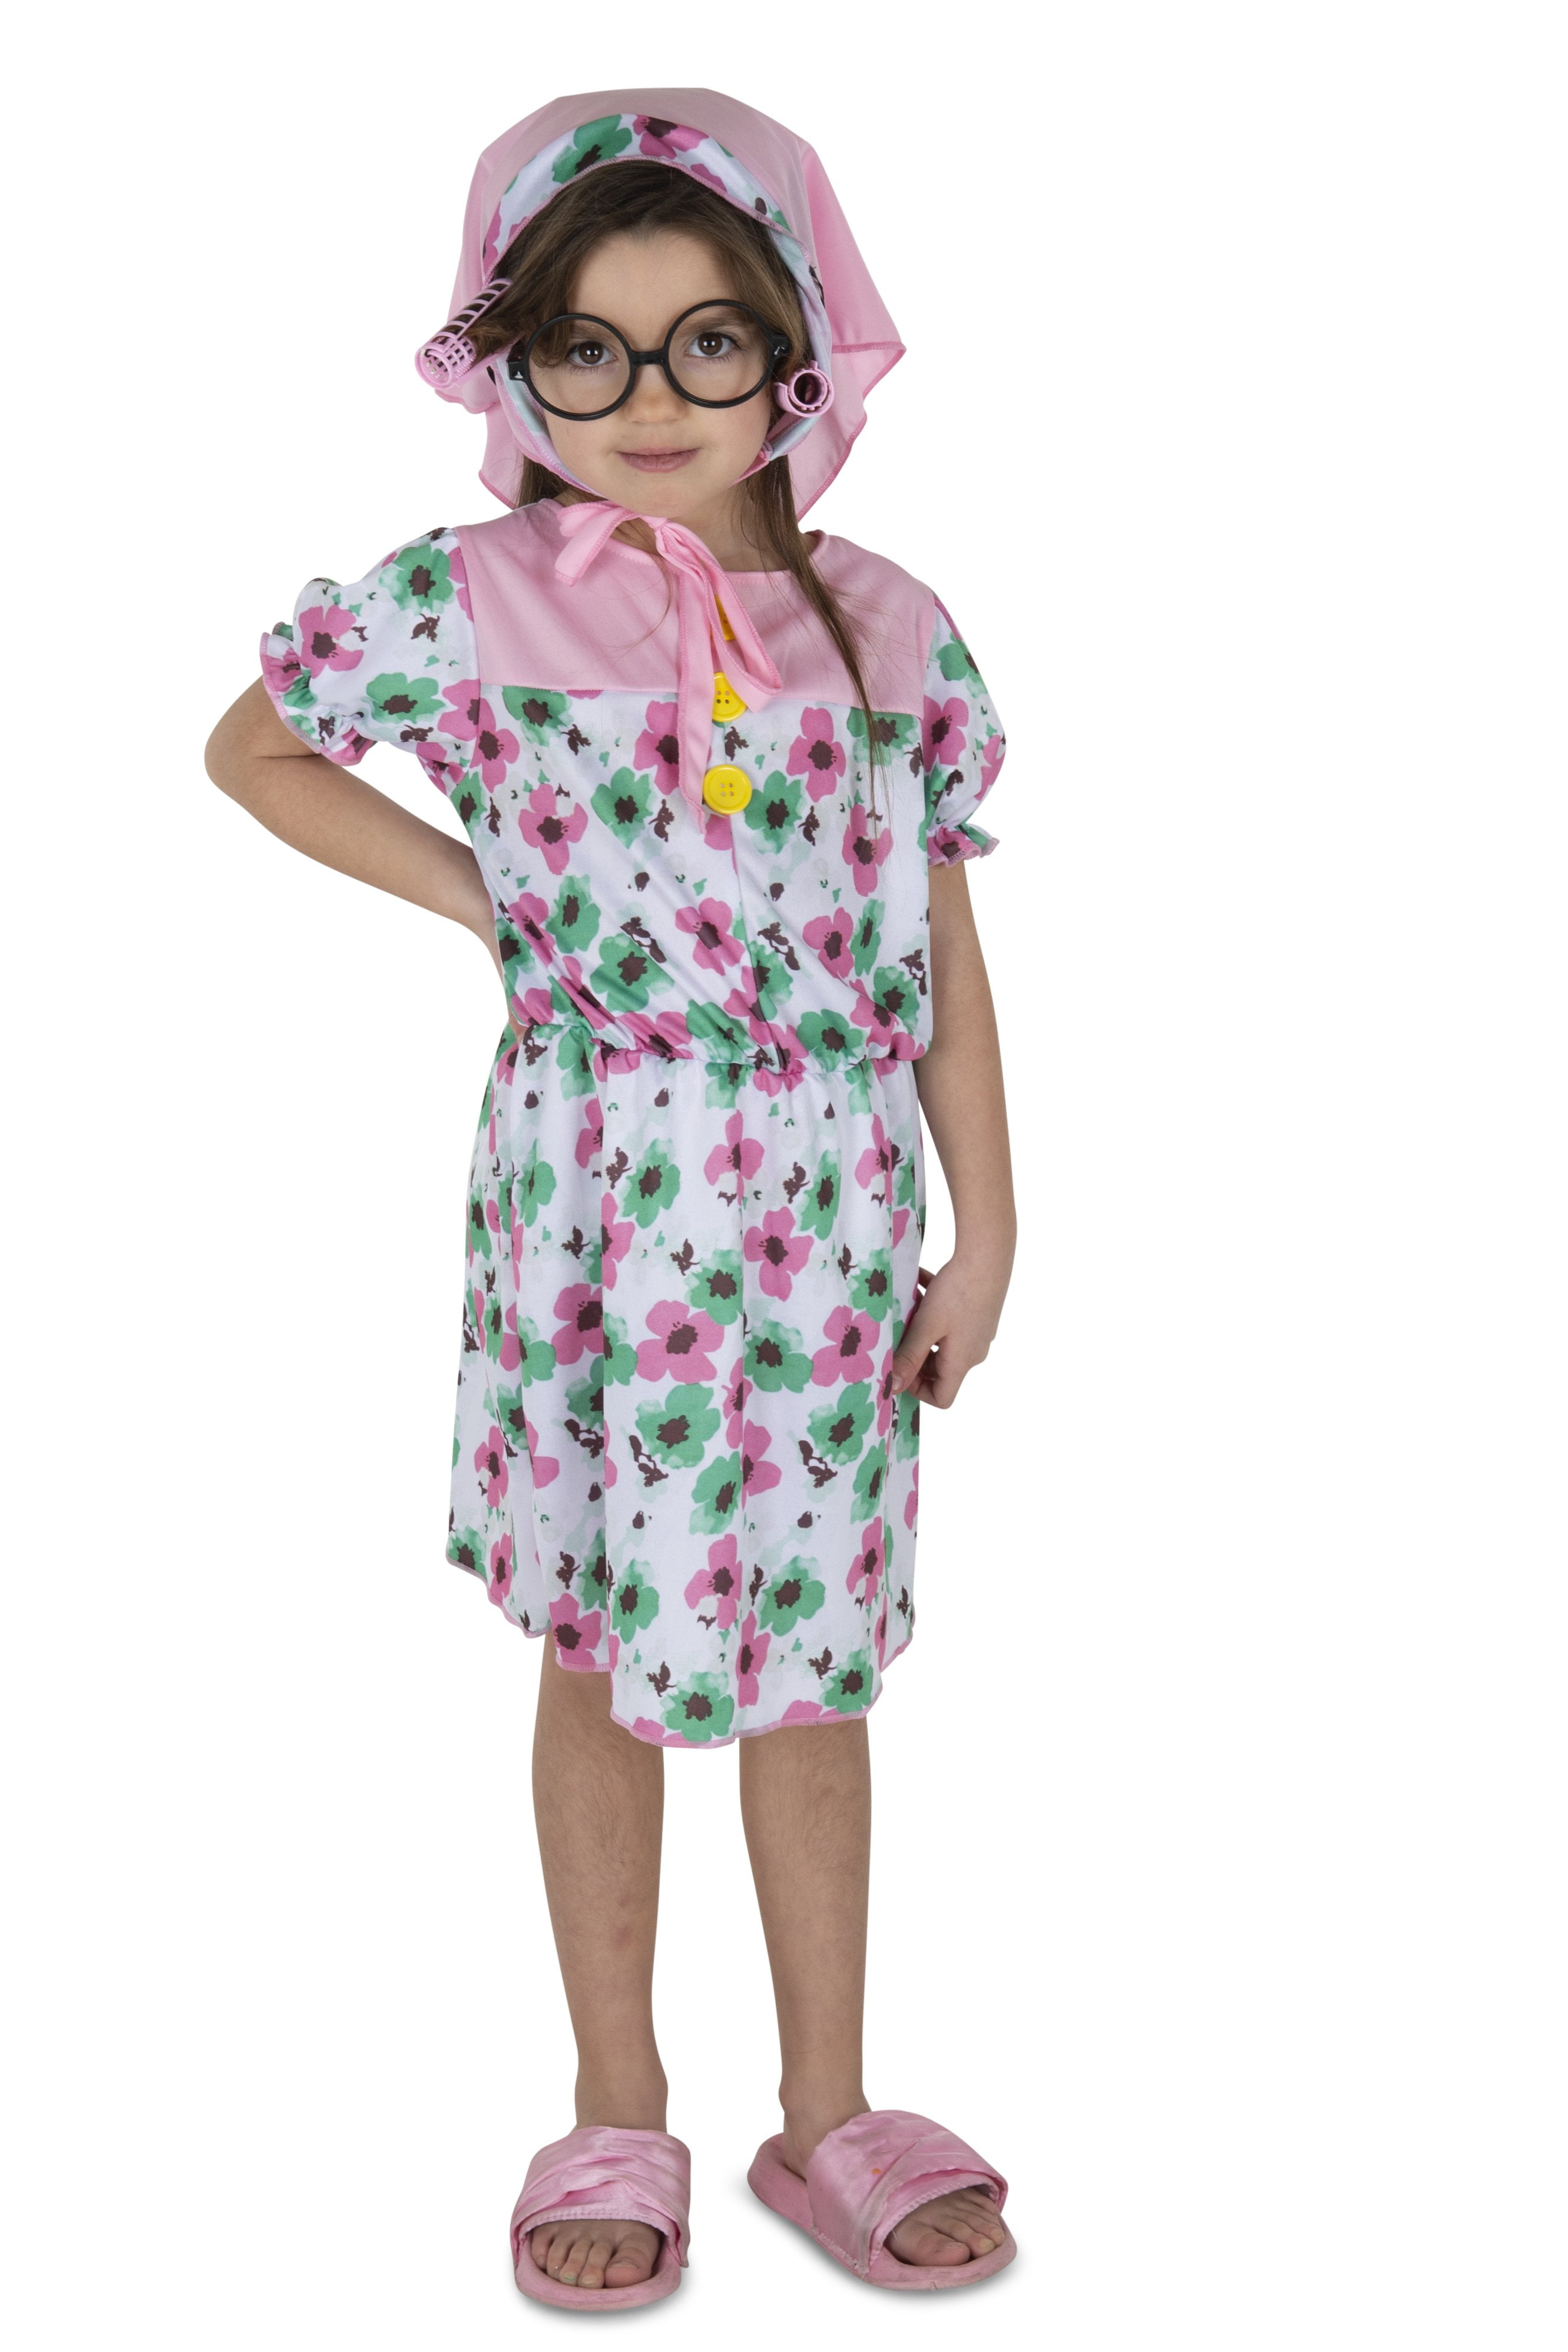 Picture of Dress Up America 1036-L Lil Granny Girls Costume - Large - Age Group 12-14 Years